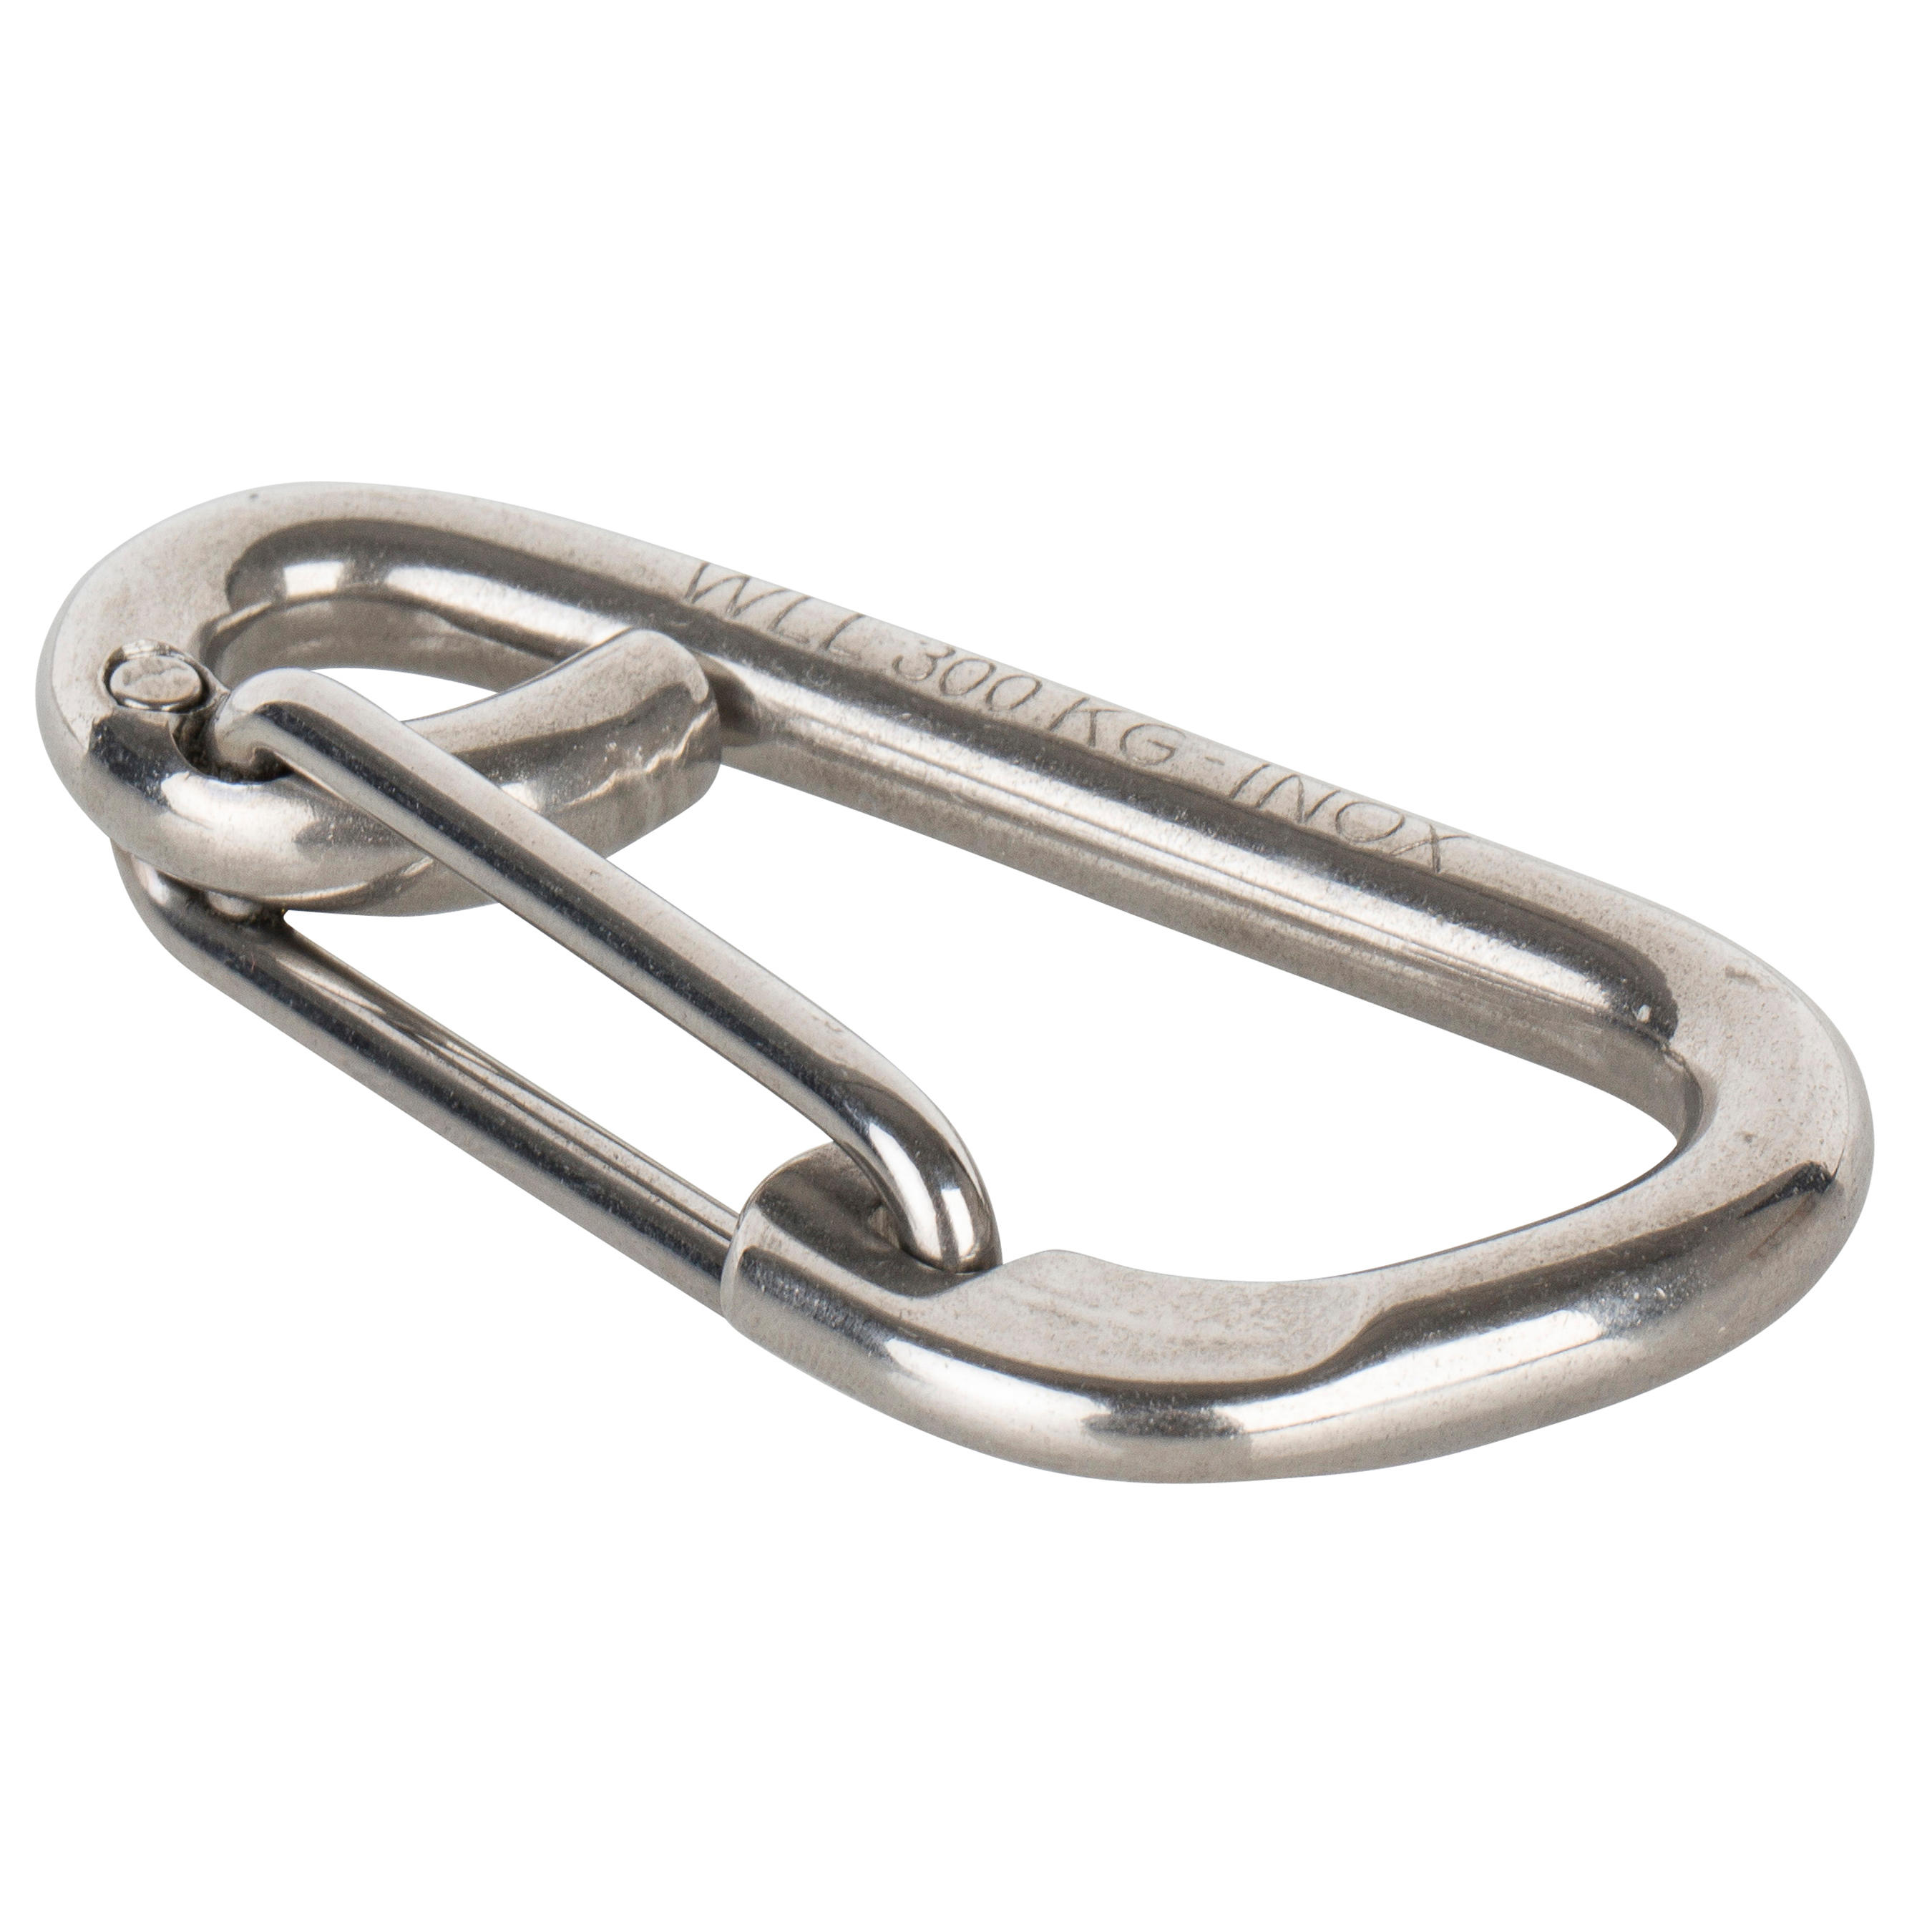 Sailing Stainless Steel Asymmetric Carbine Hook 8 mm 1/4